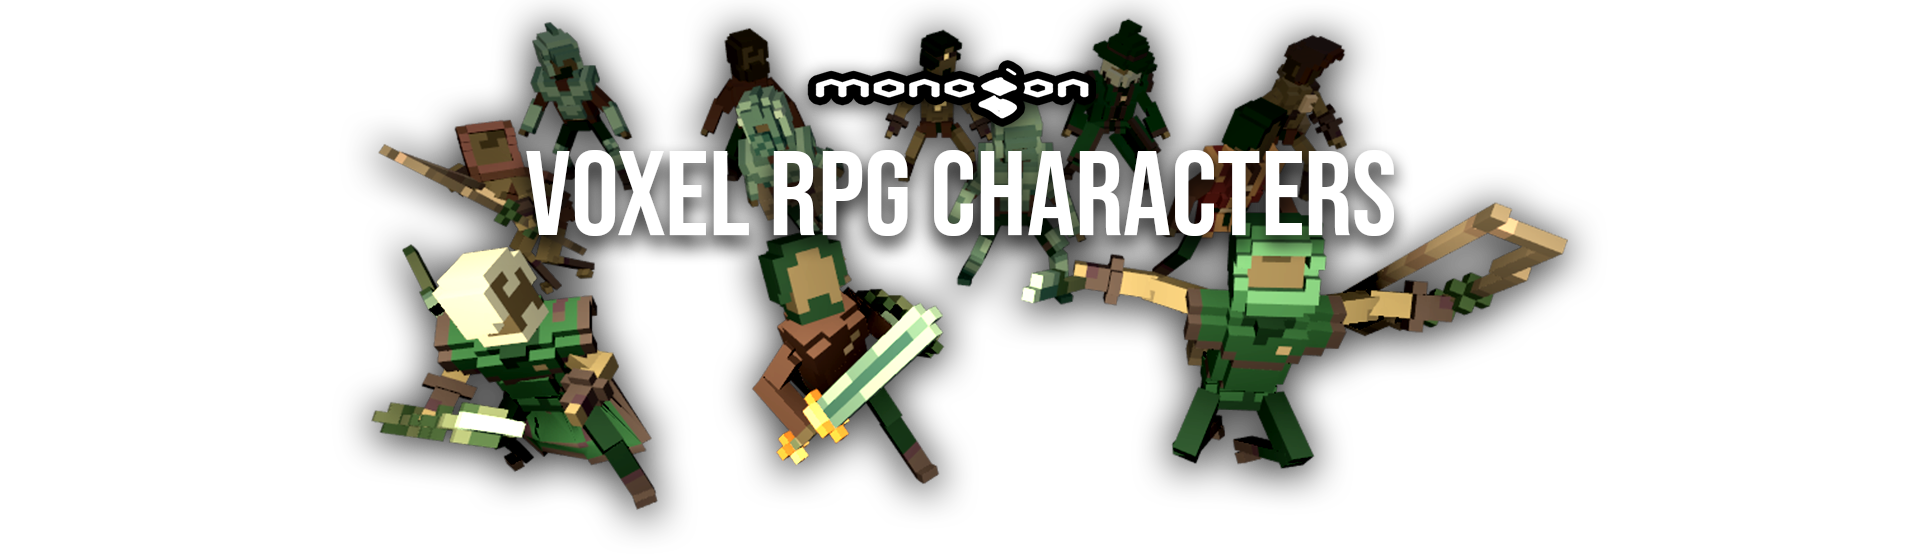 Voxel RPG Characters And Weapons - monogon